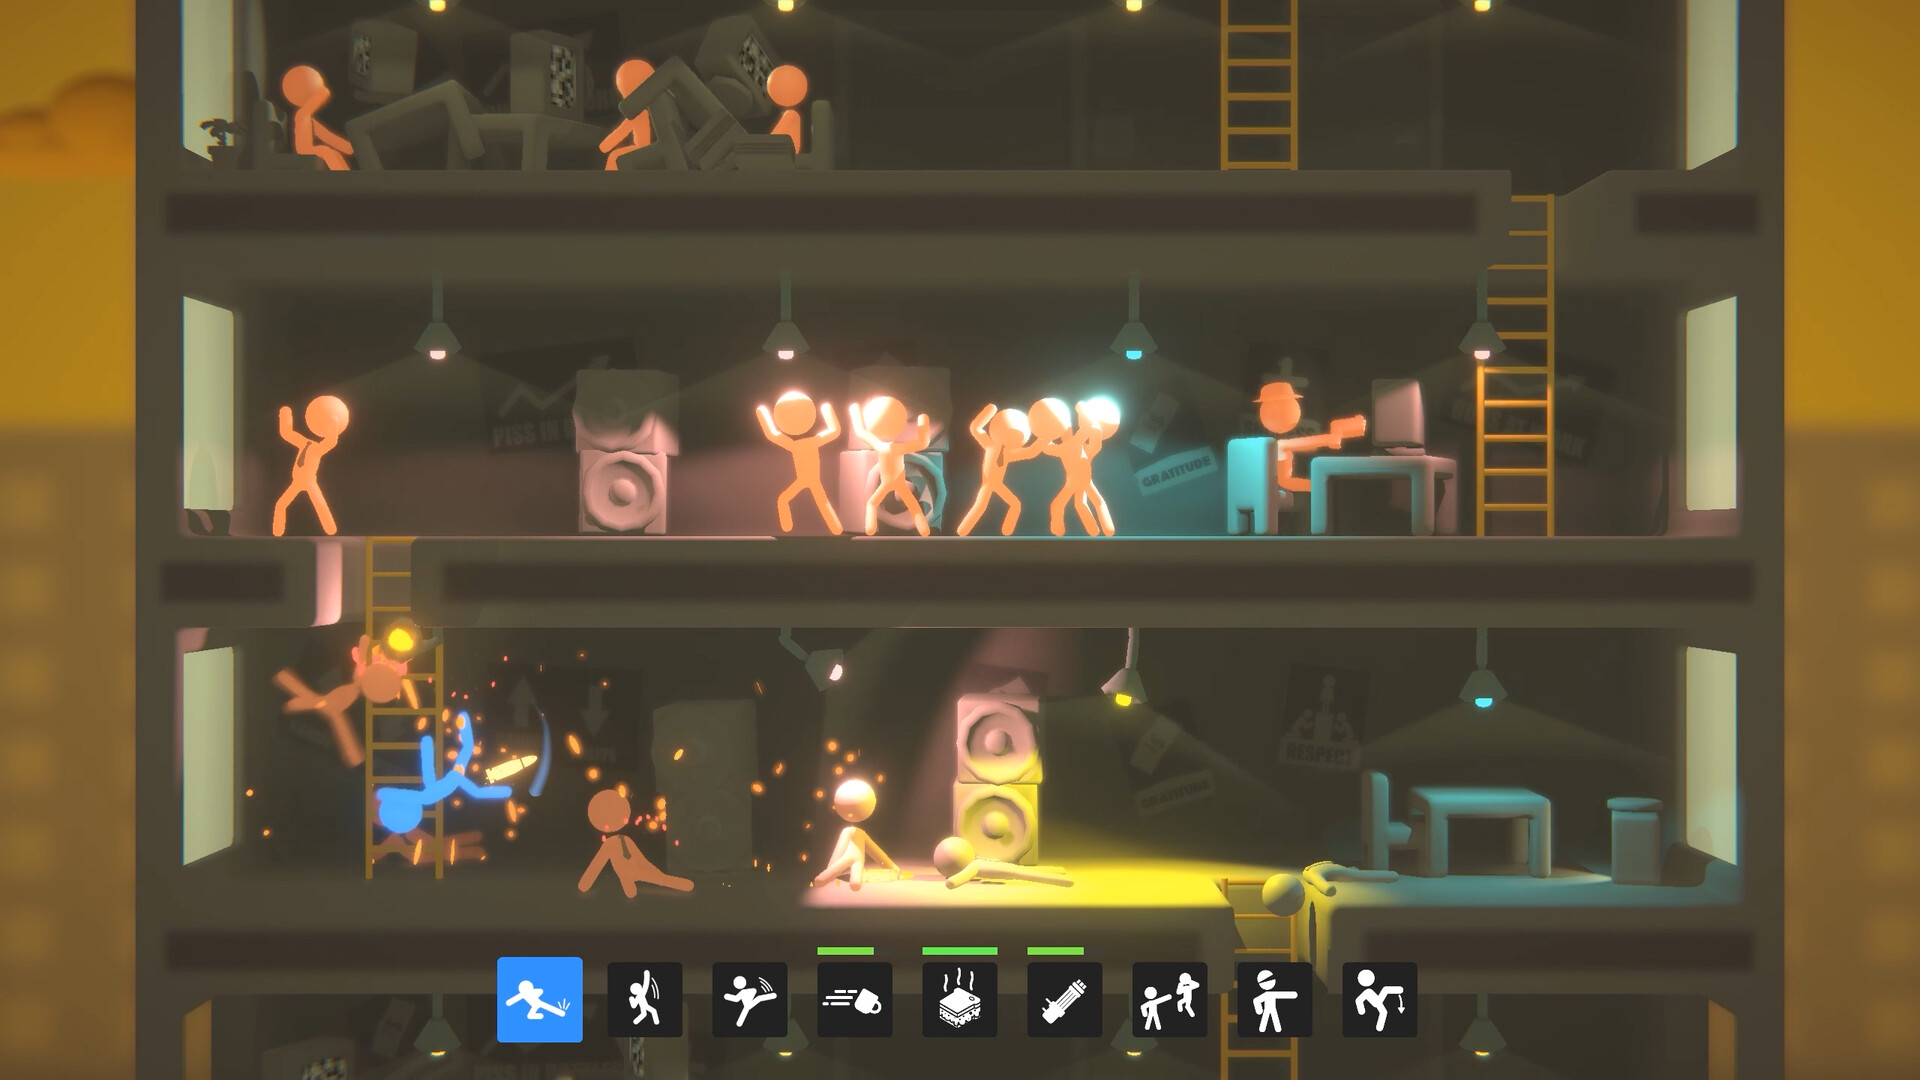 Get a free serial key for Stick Fight: The Game on Steam